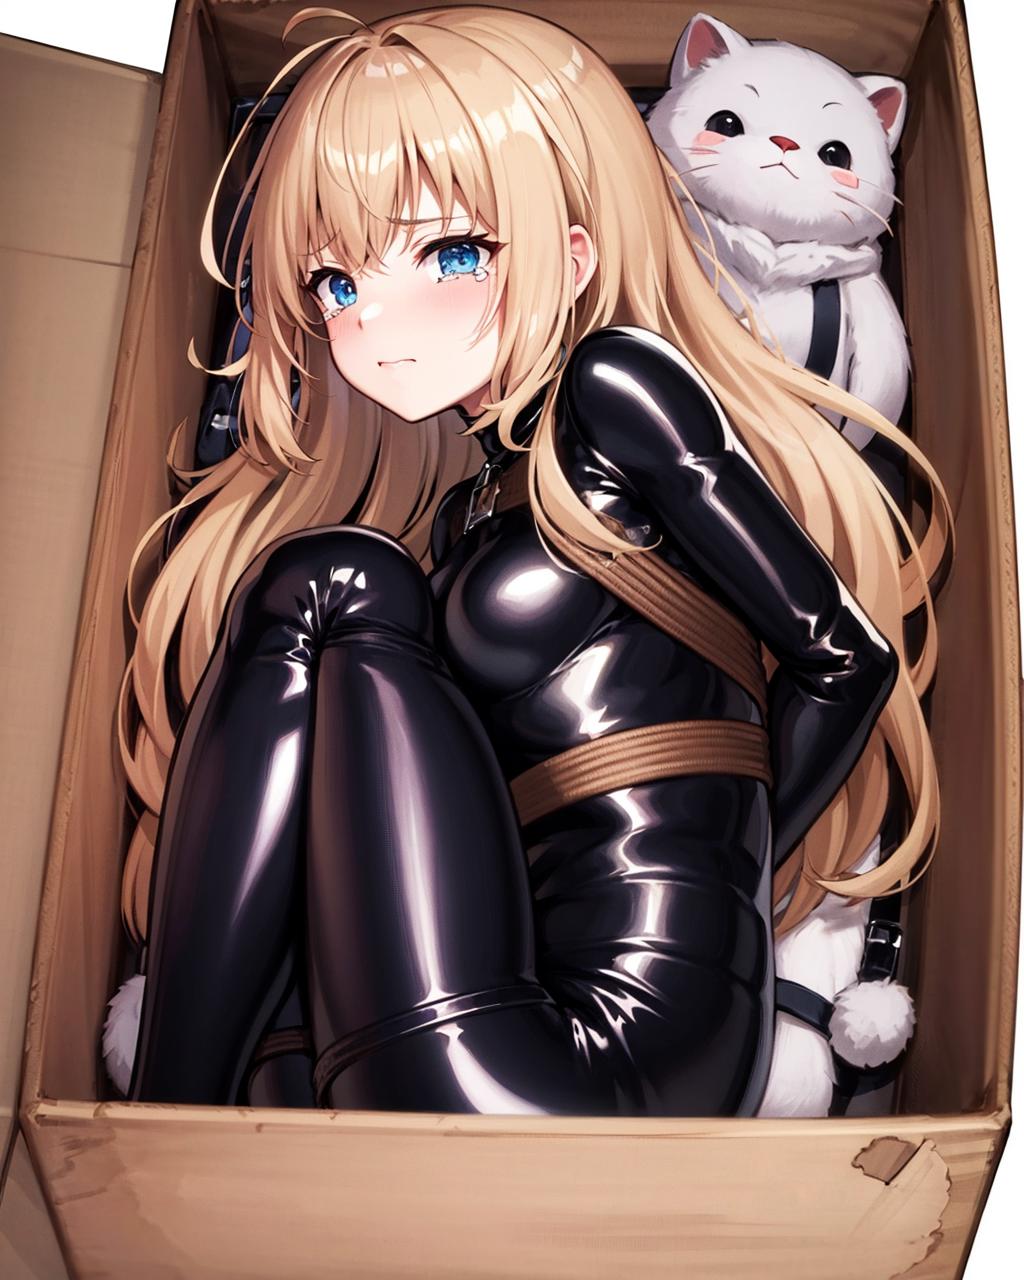 A young girl wearing a black catsuit is sitting in a cardboard box with a white teddy bear.